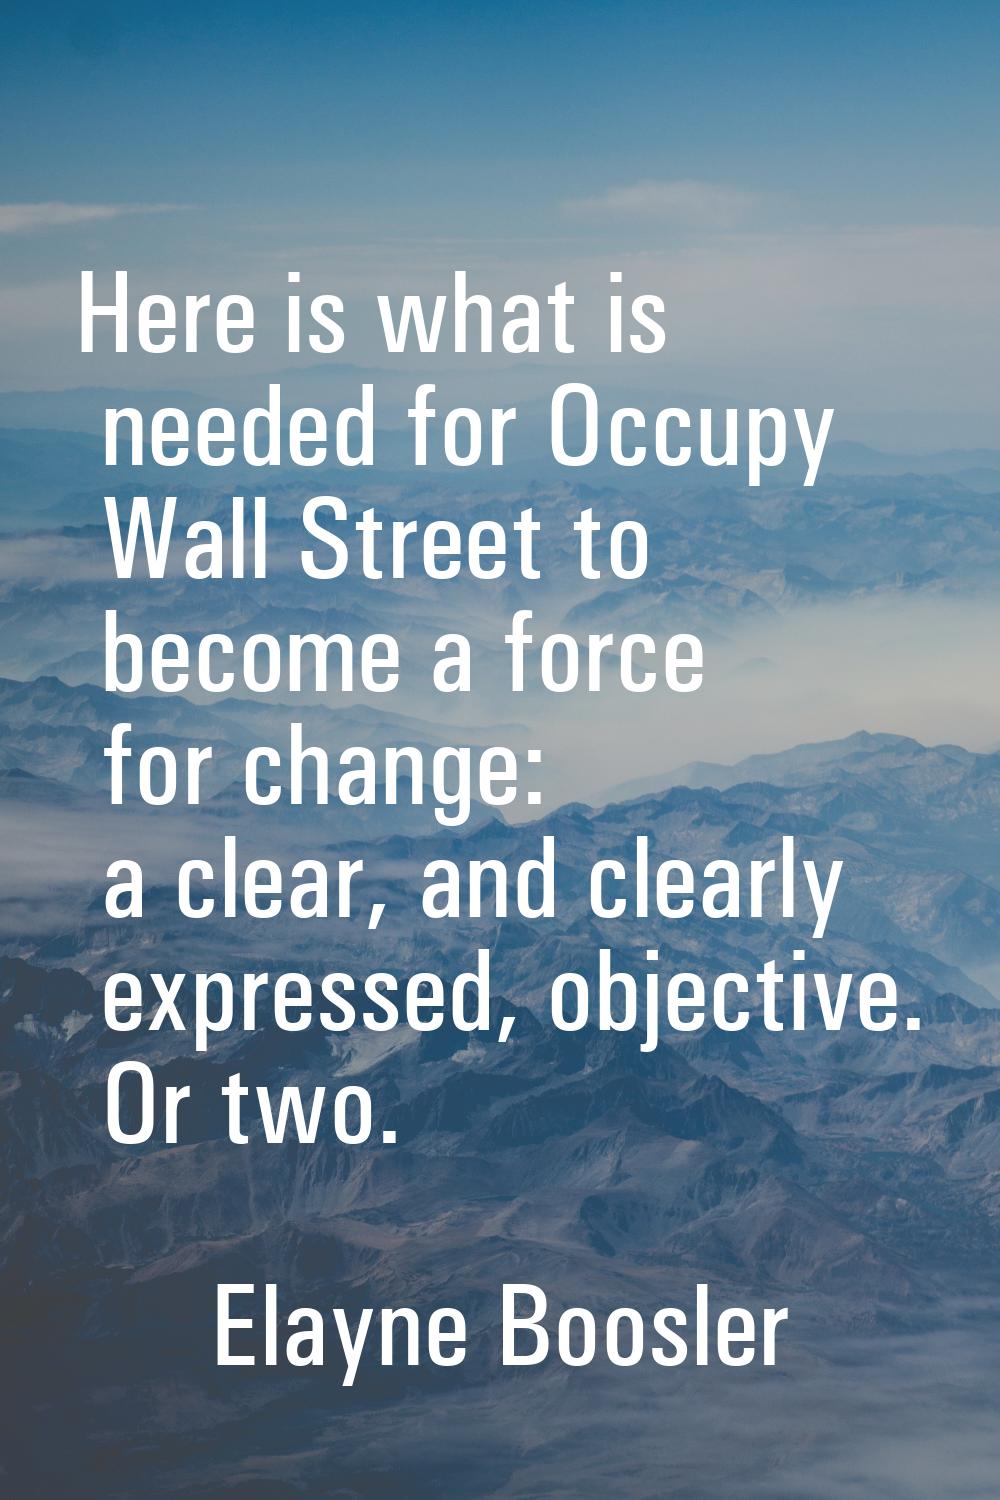 Here is what is needed for Occupy Wall Street to become a force for change: a clear, and clearly ex